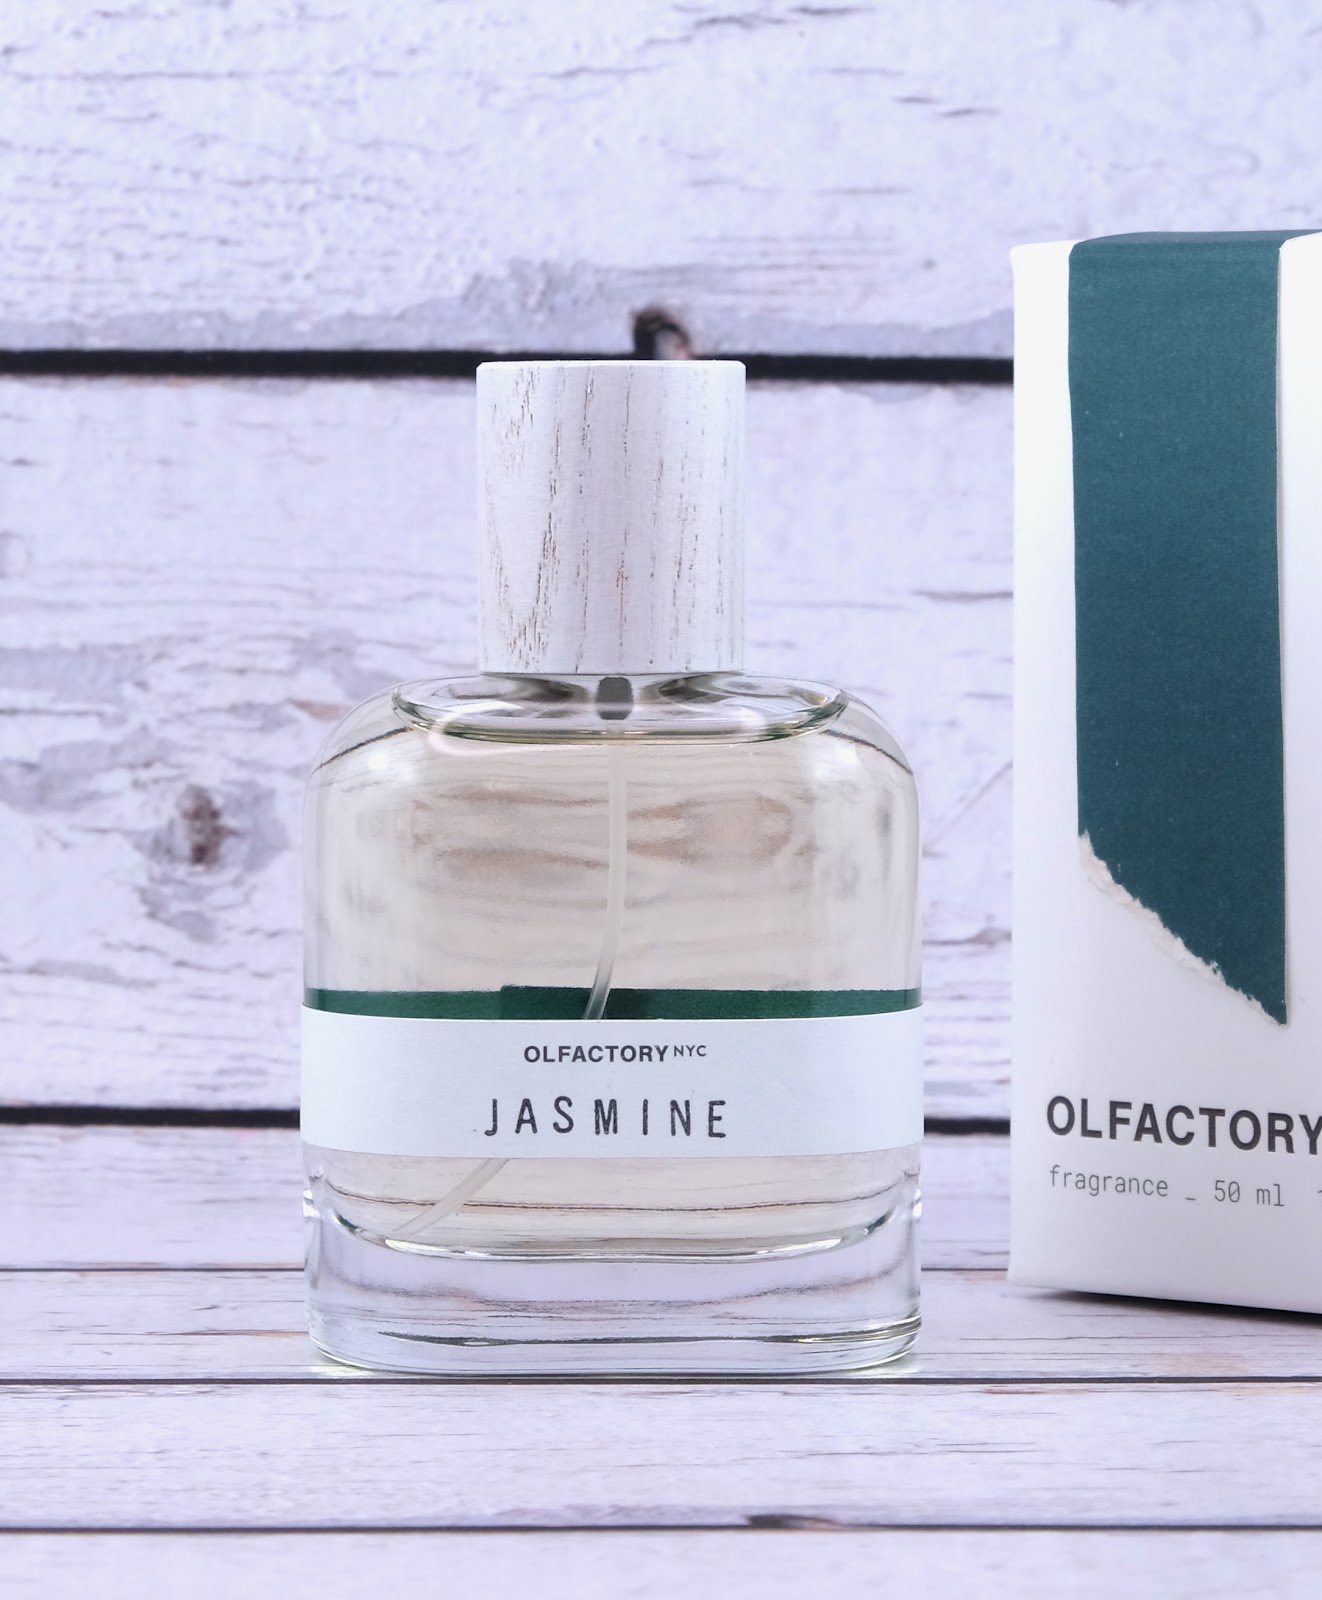 Olfactory NYC | My Custom Fragrance Experience: Review